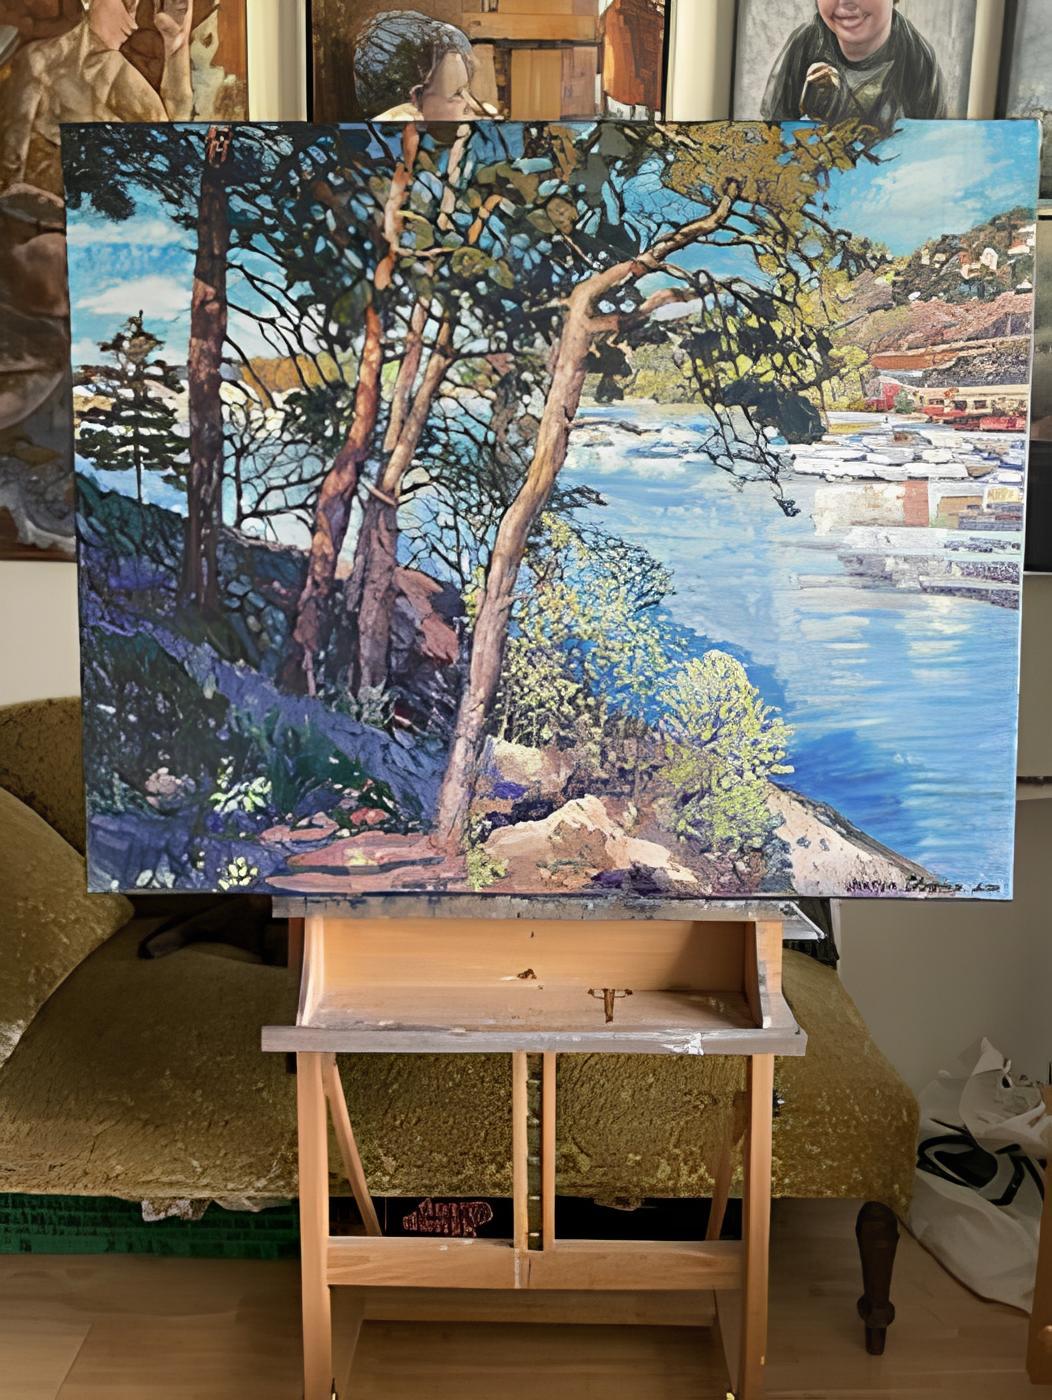 In creating this oil painting, I poured my fascination with the interplay of light and nature onto the canvas. As an impressionistic work, it captures the serene essence of a coastal moment, where the wild pines stand as silent observers to the